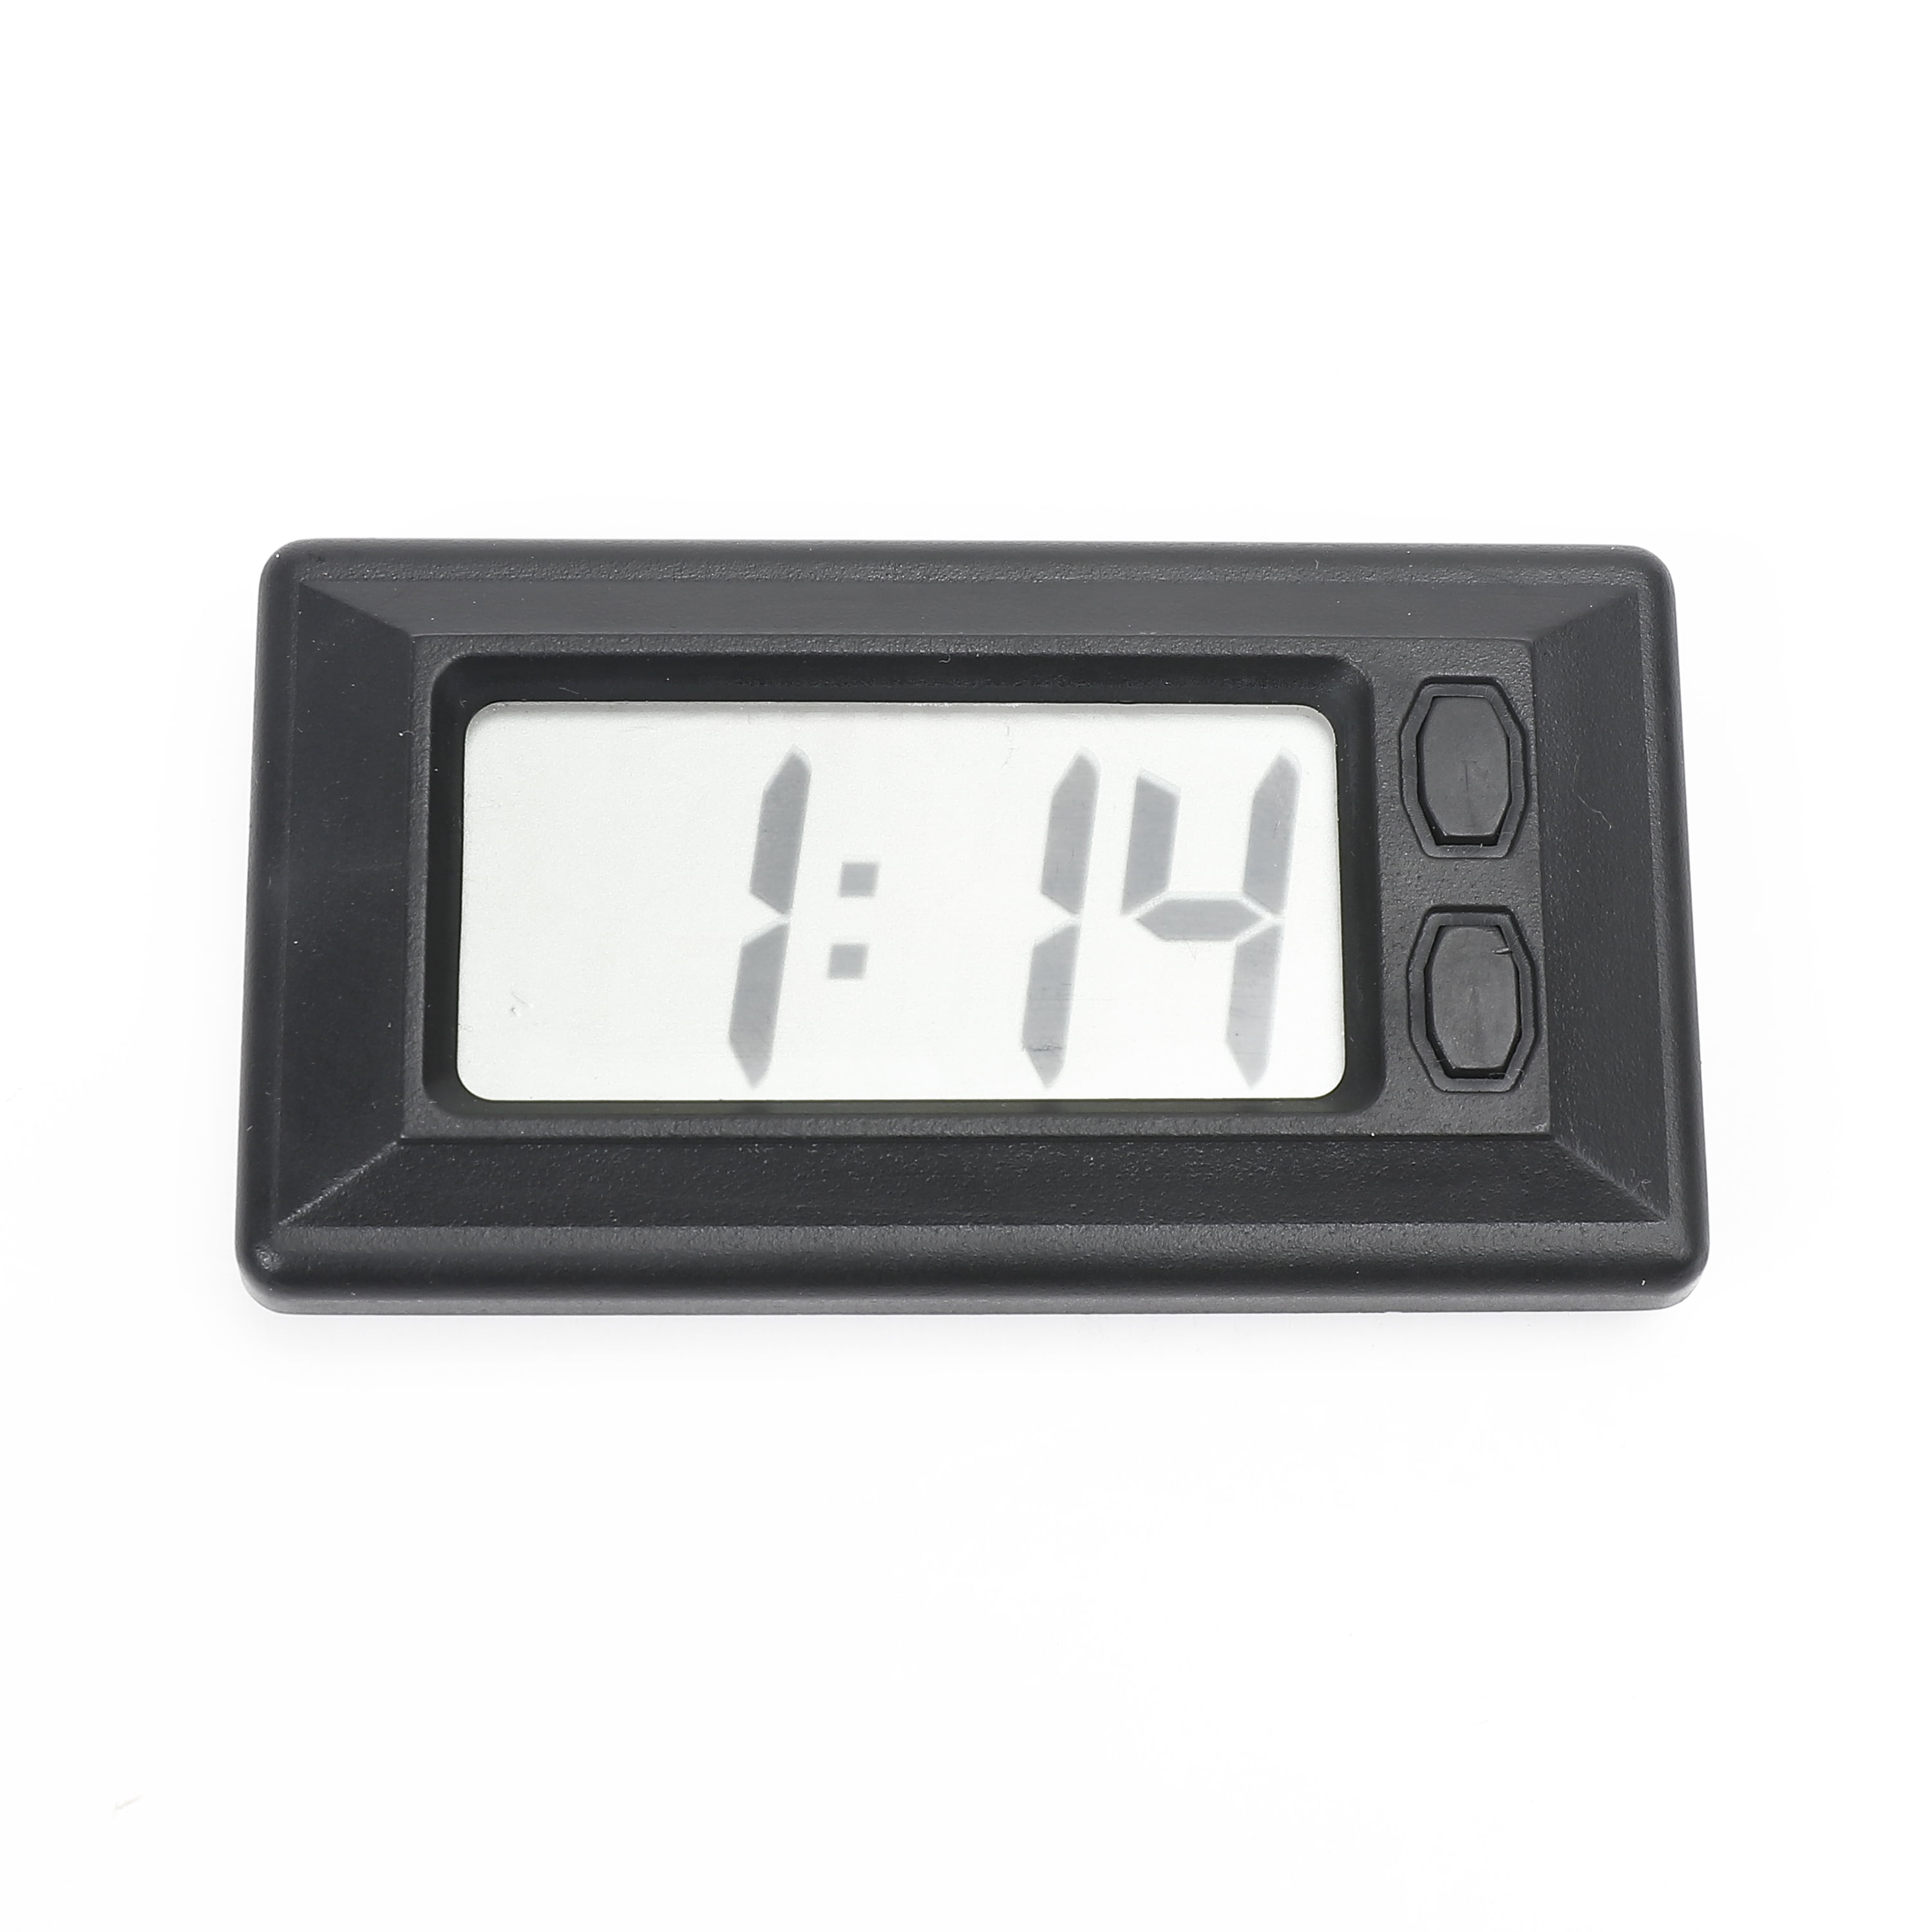 Auto Drive Battery Powered Digital Clock with 3x 1.6” LED Display